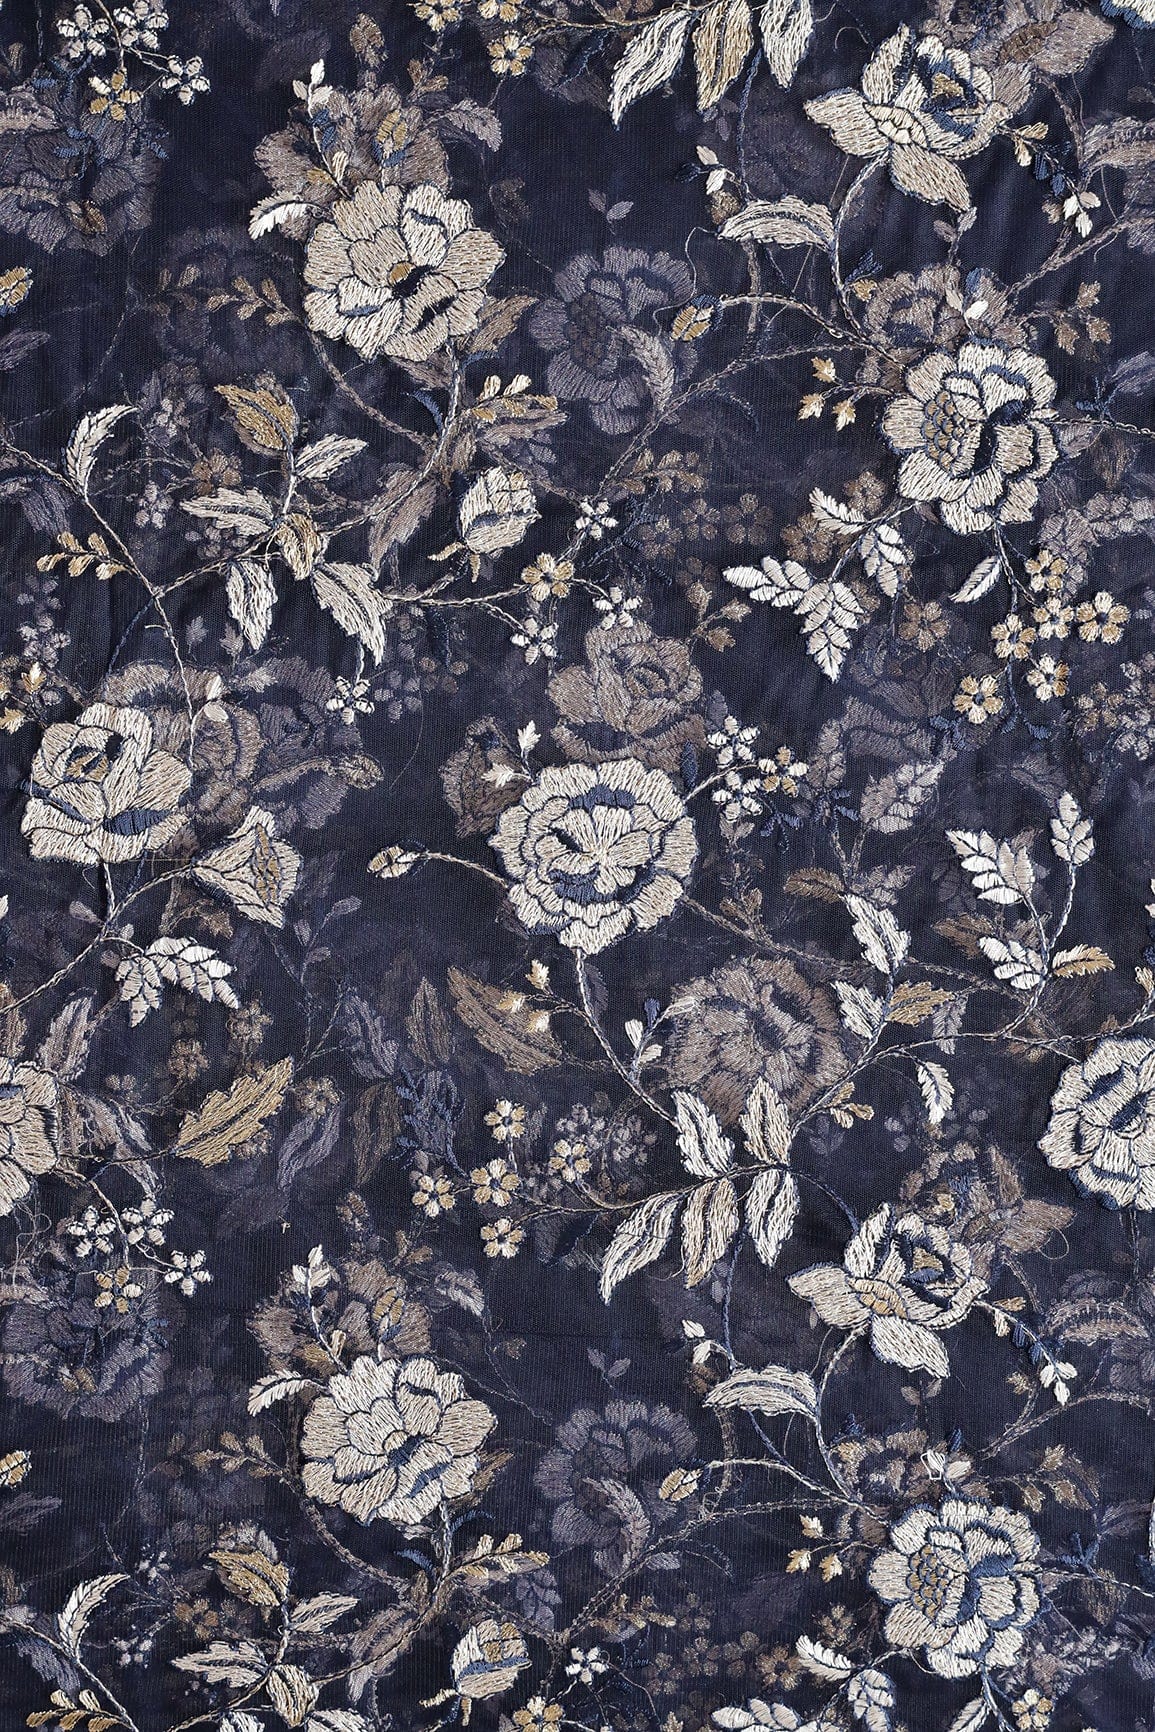 doeraa Embroidery Fabrics Heavy Floral Beige And Blue Thread Work Embroidery On Navy Blue Soft Net Fabric